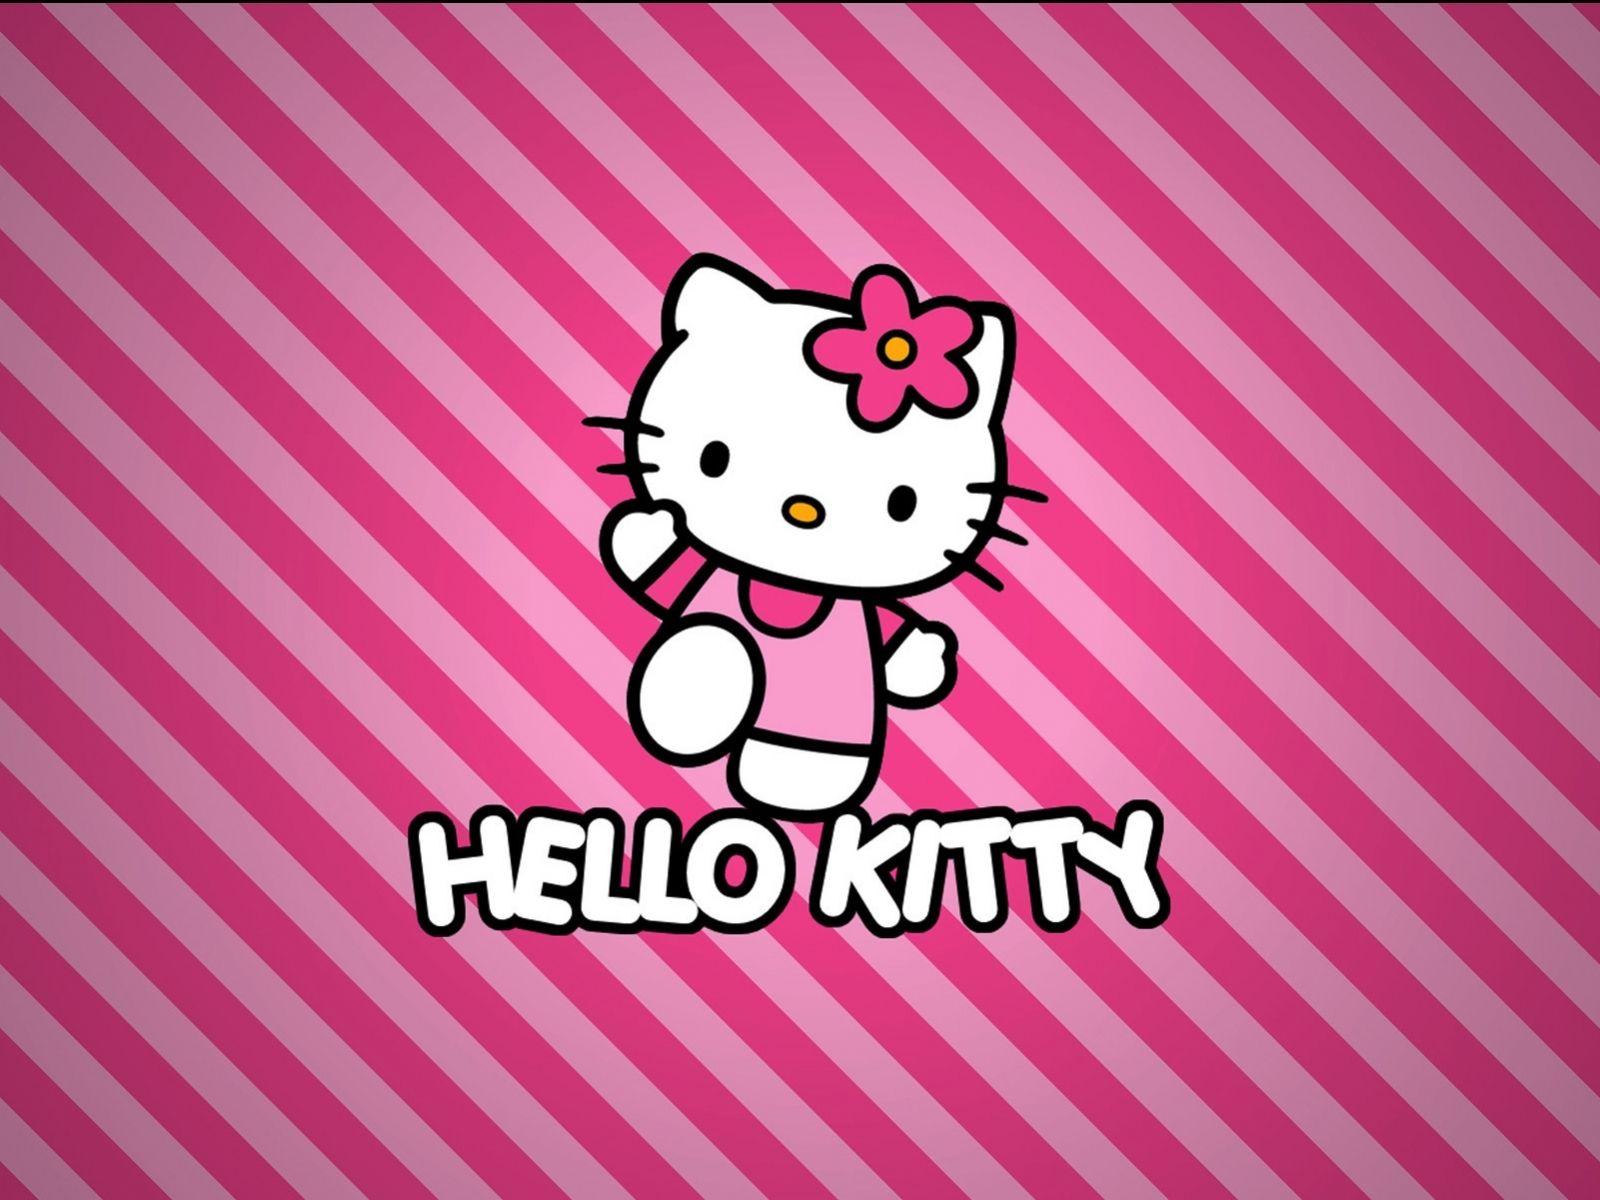 Hello Kitty tablet wallpapers - Lemon8 Search